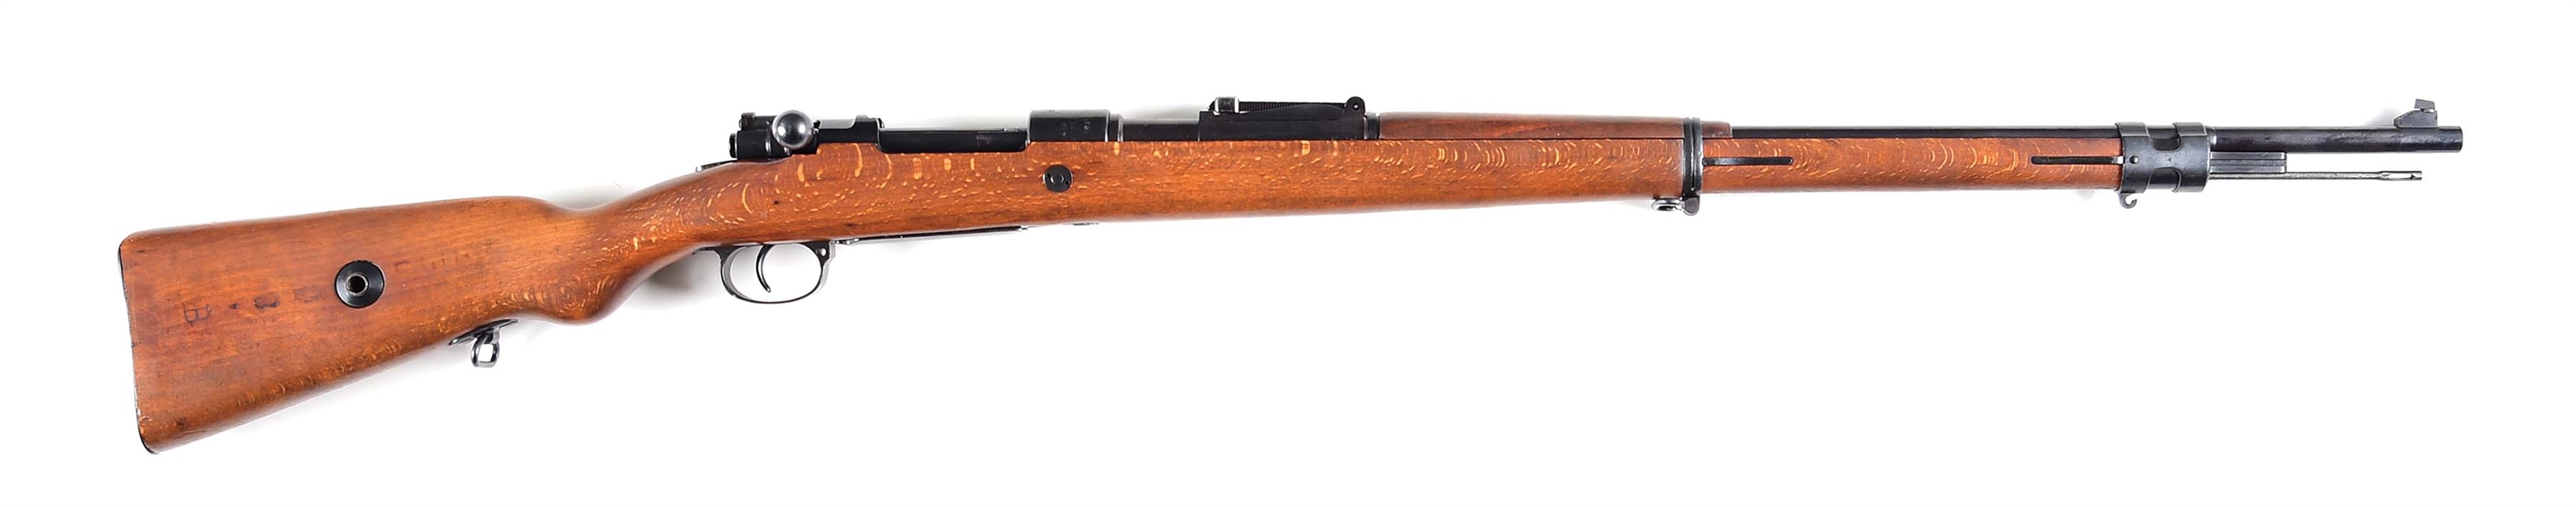 (C) SCARCE GERMAN DANZIG "1917" DATED G98B BOLT ACTION RIFLE CONVERTED BY MAUSER.